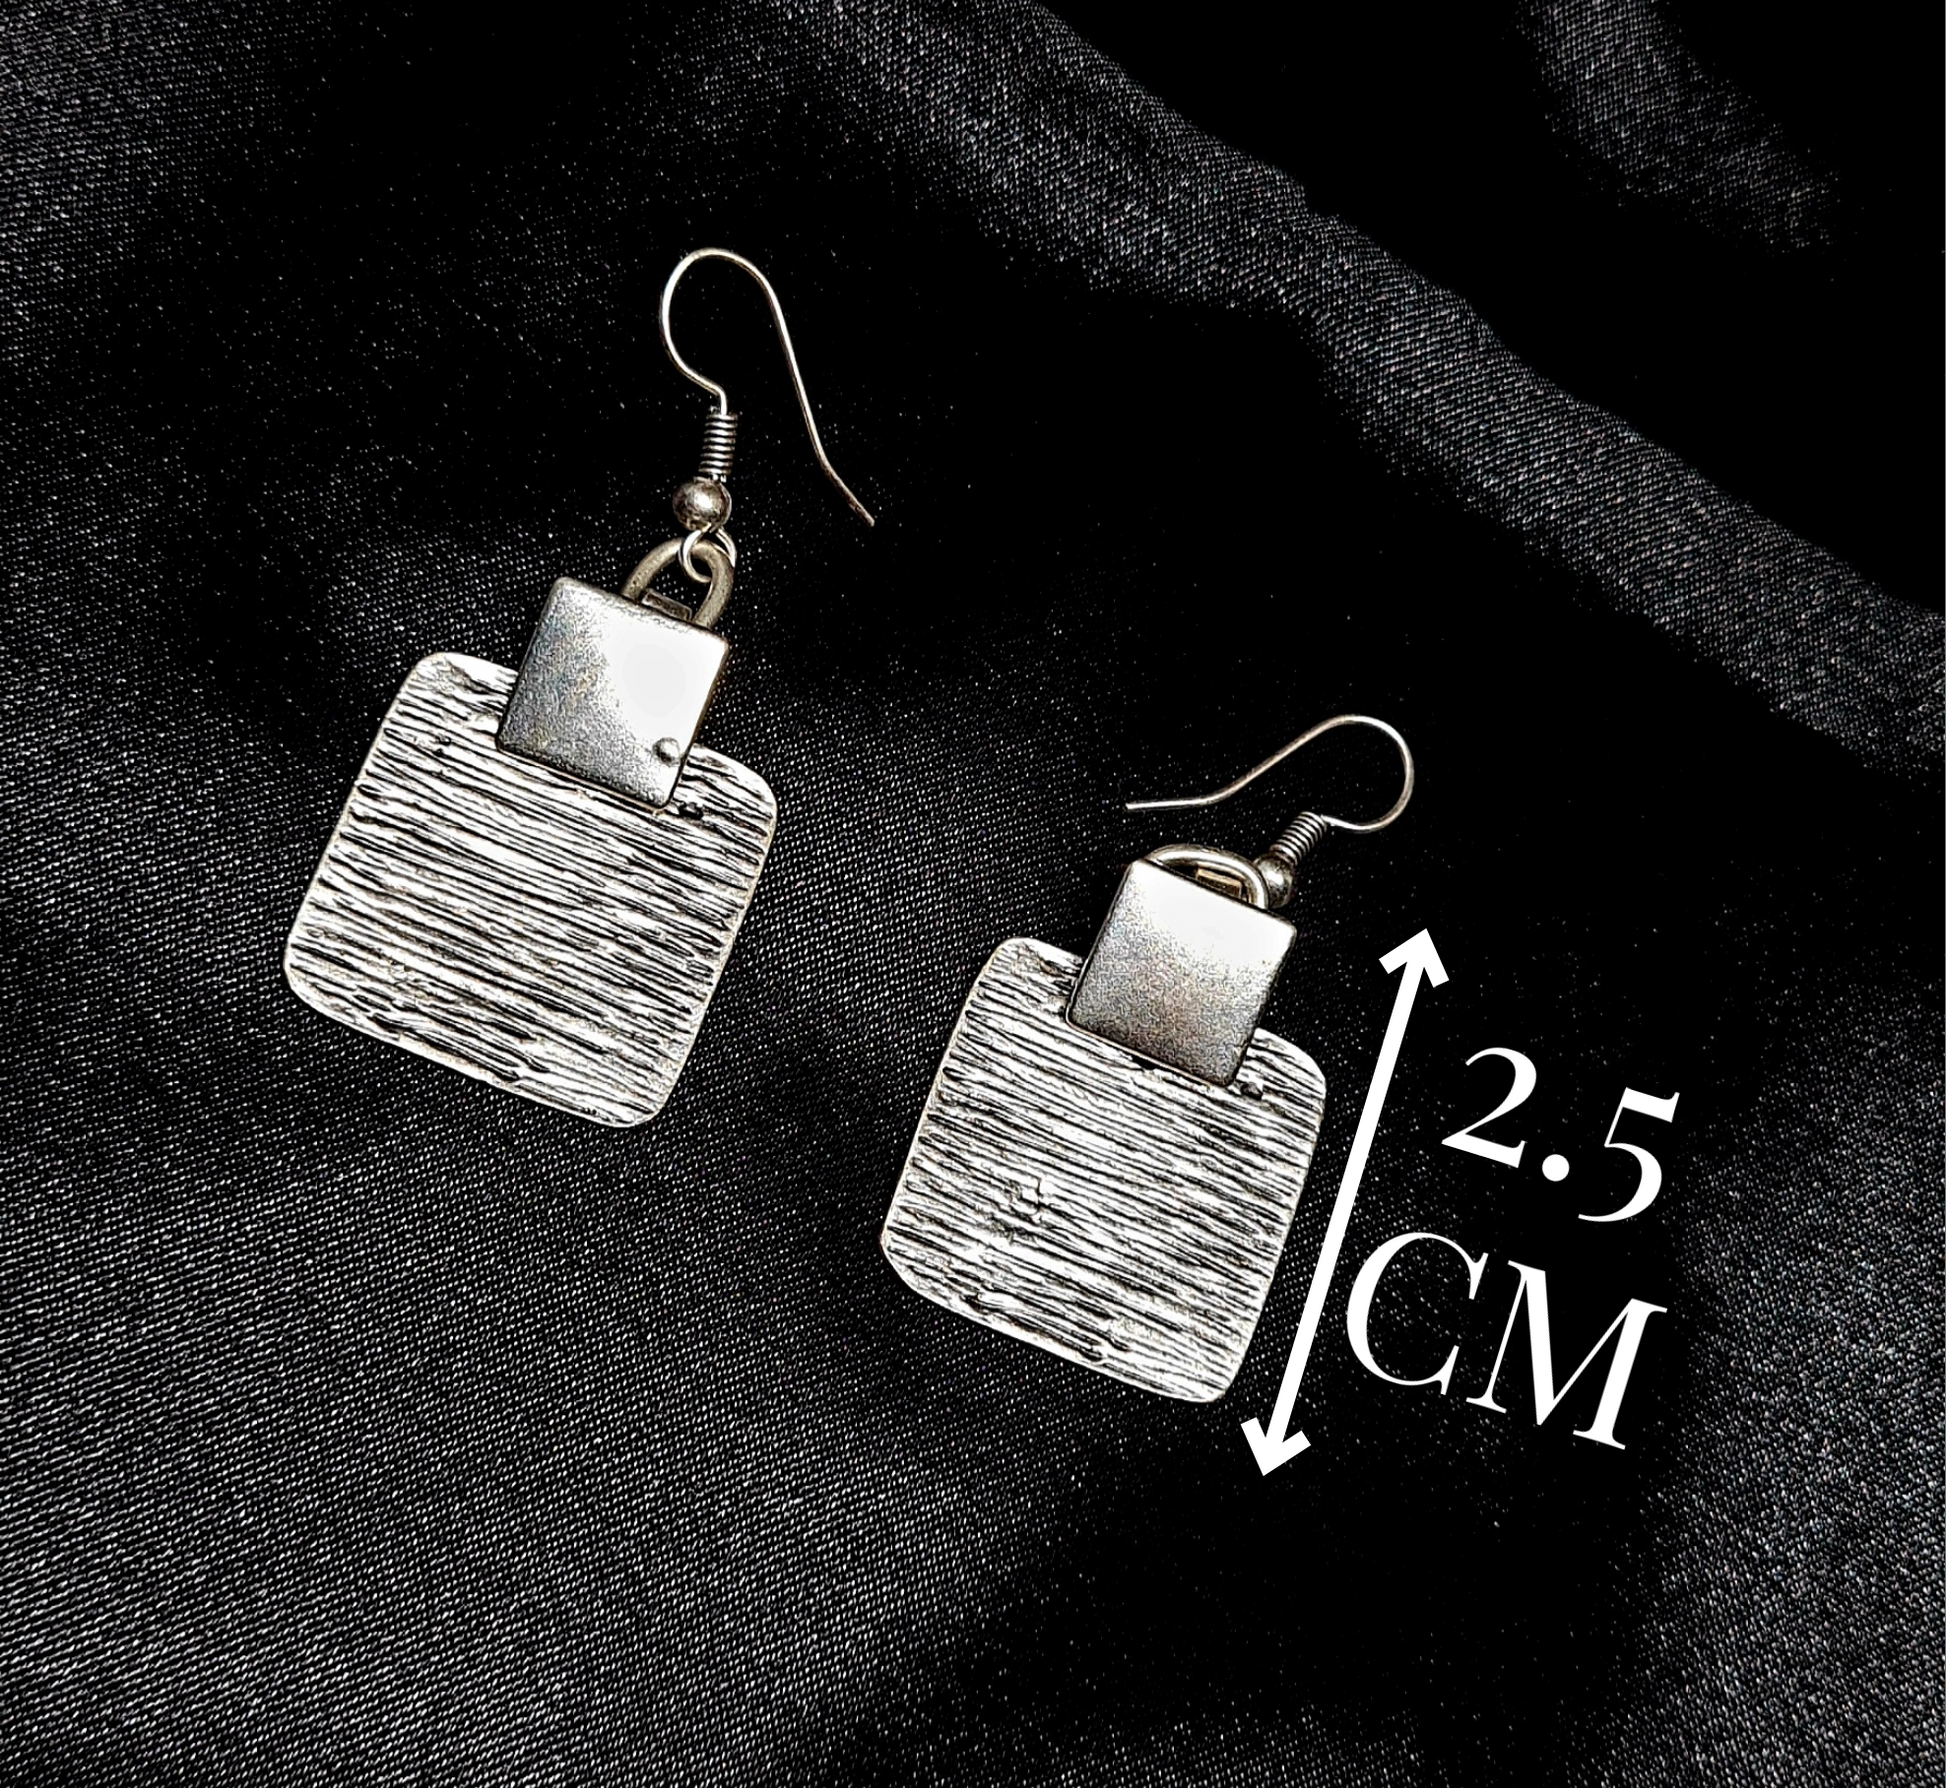 A pair of silver earrings sitting on a black cloth. The earrings are small and delicate, and they have a square shape. The earrings are made of silver and have a shiny finish with measures.